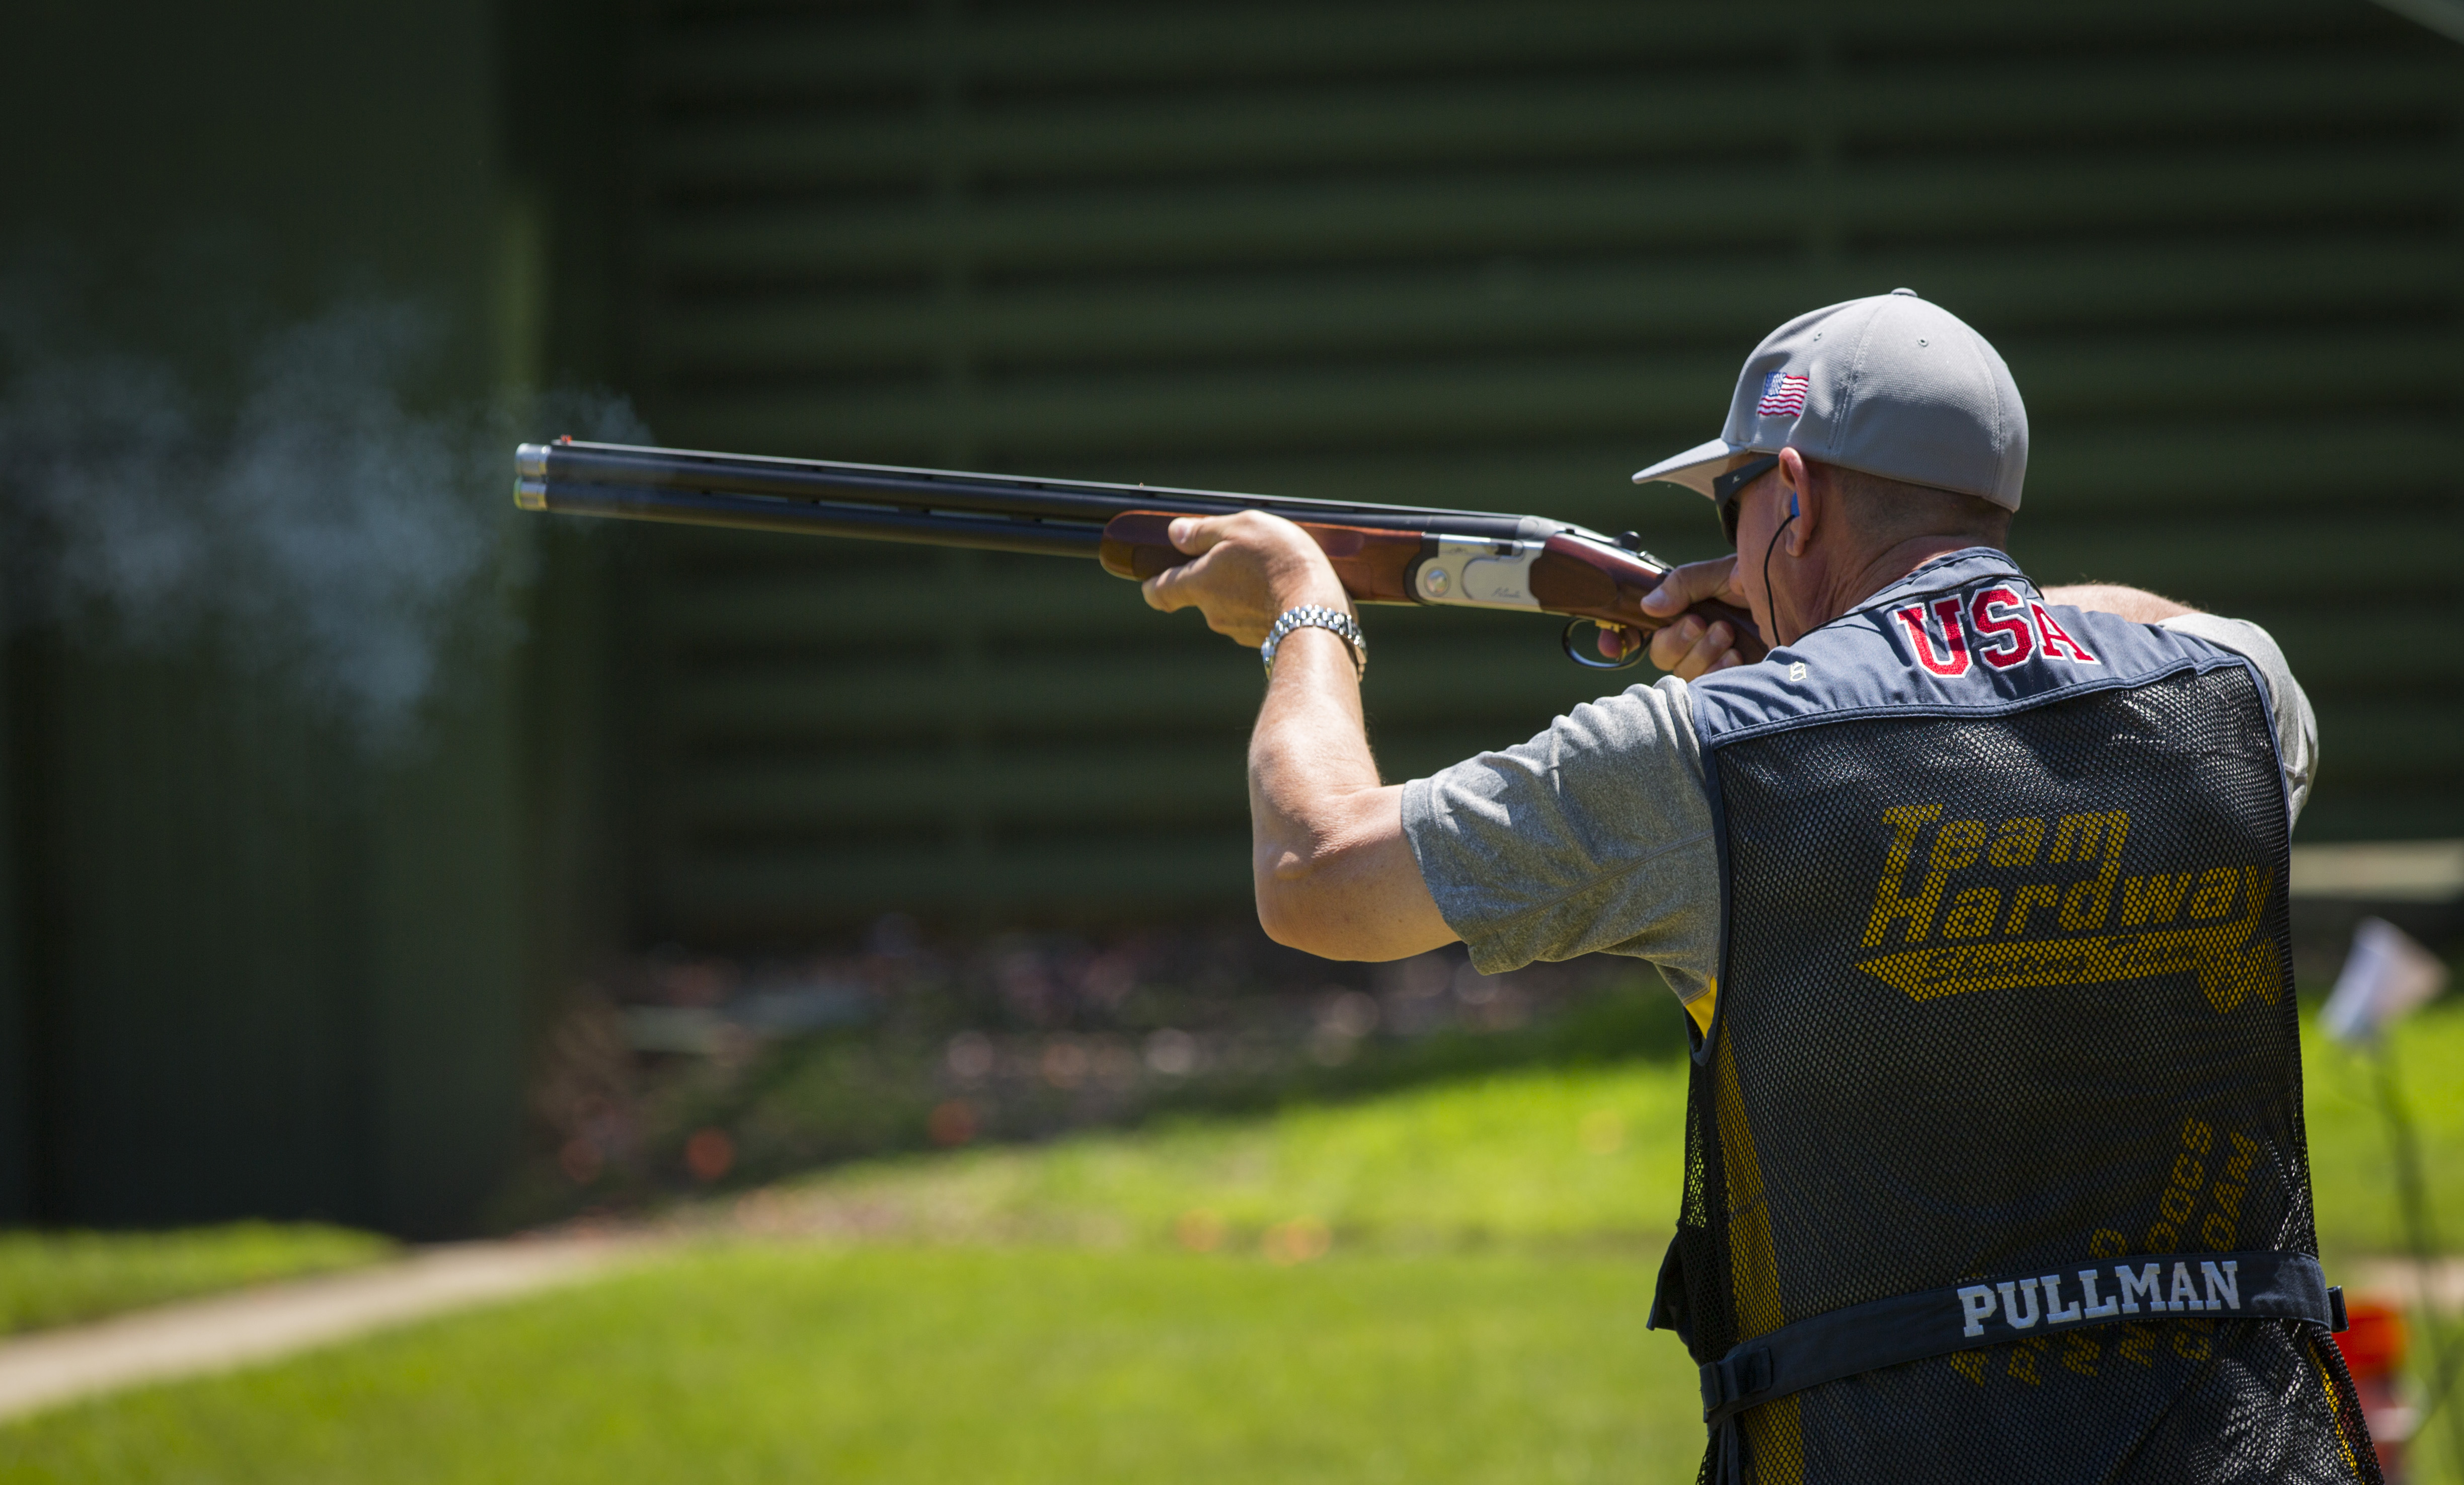 Michael Pullman, a CBP supervisory air interdiction agent, fires his Beretta shotgun in the trap shooting contest at the 2015 World Police & Fire Games, Centreville, Virginia. Photo by James Tourtellotte